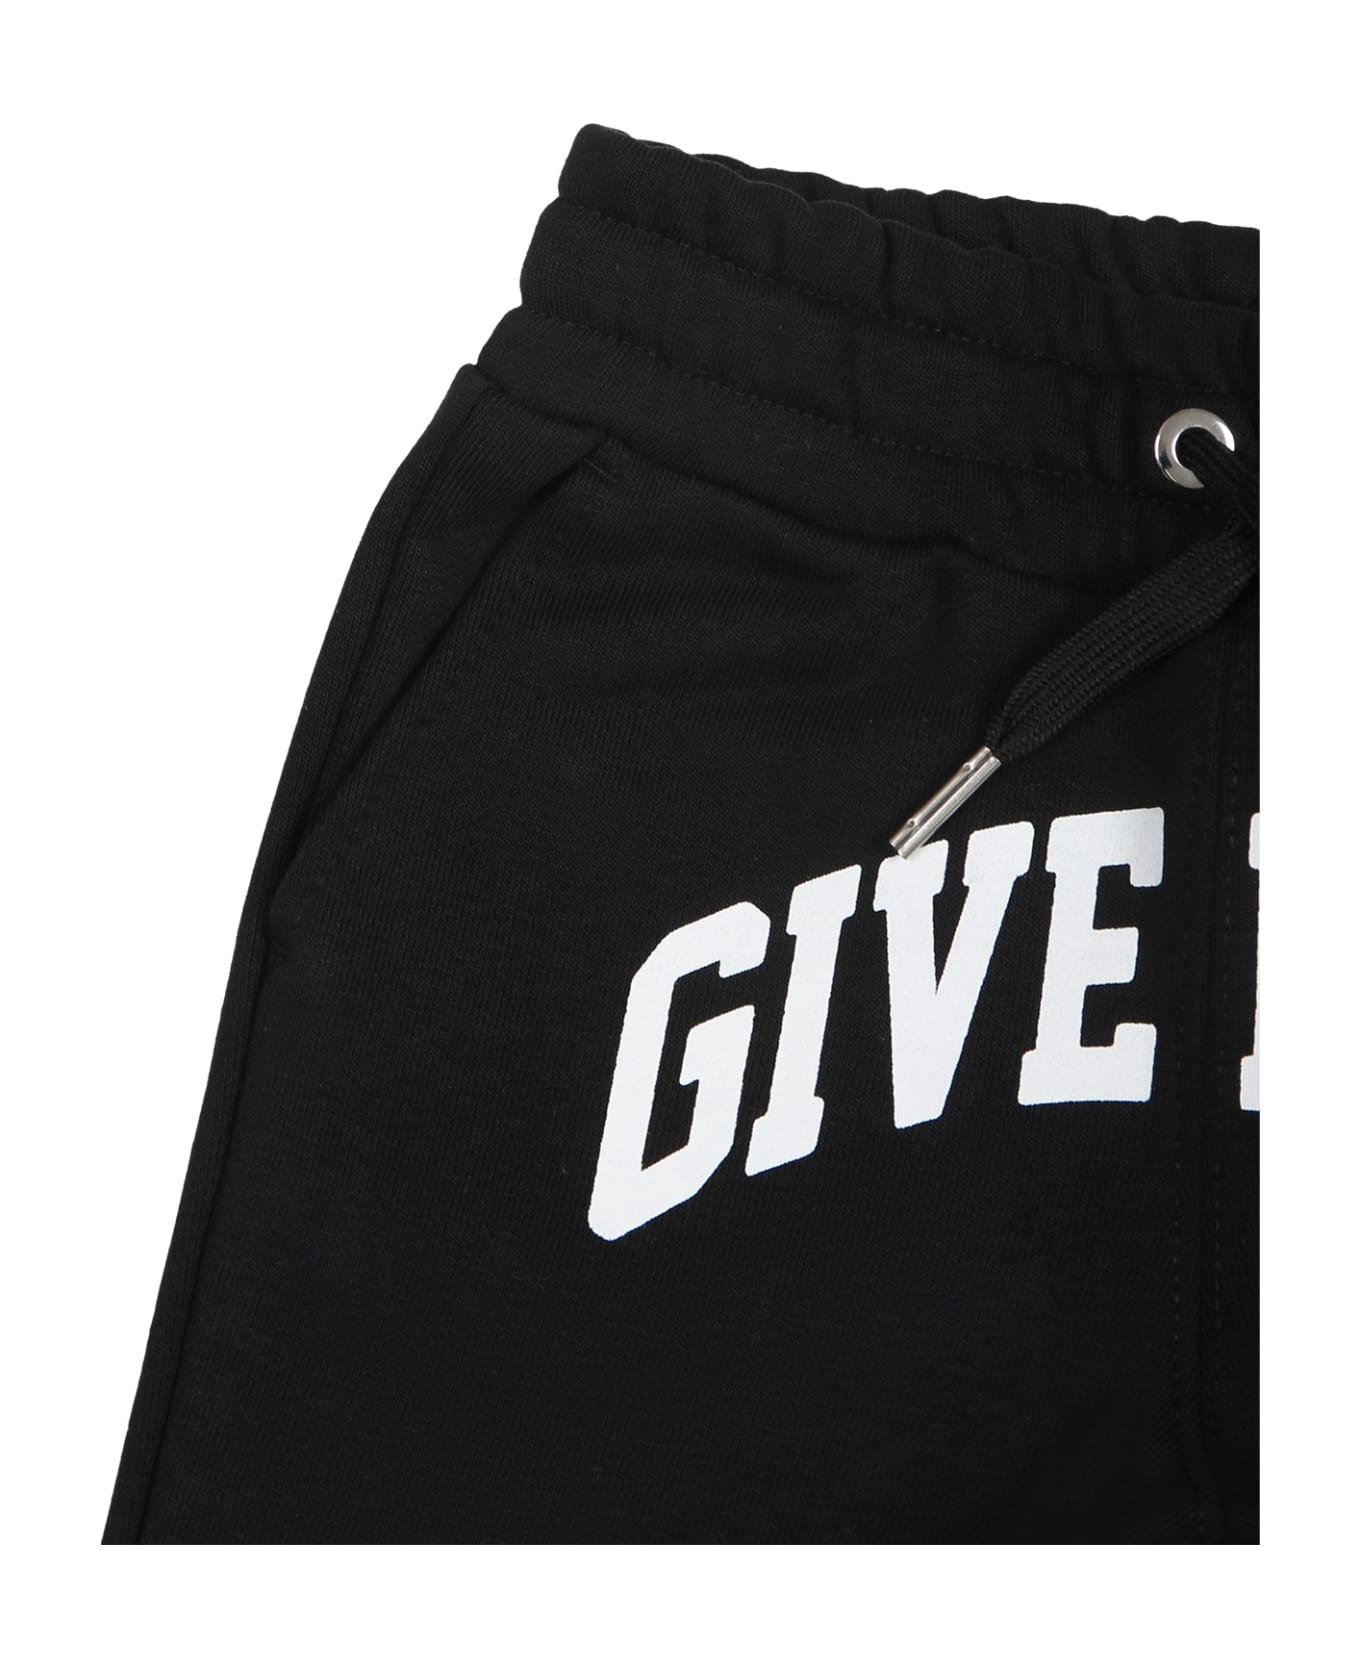 Givenchy Black Tracksuit Trousers Fpr Baby Boy With Logo - Black